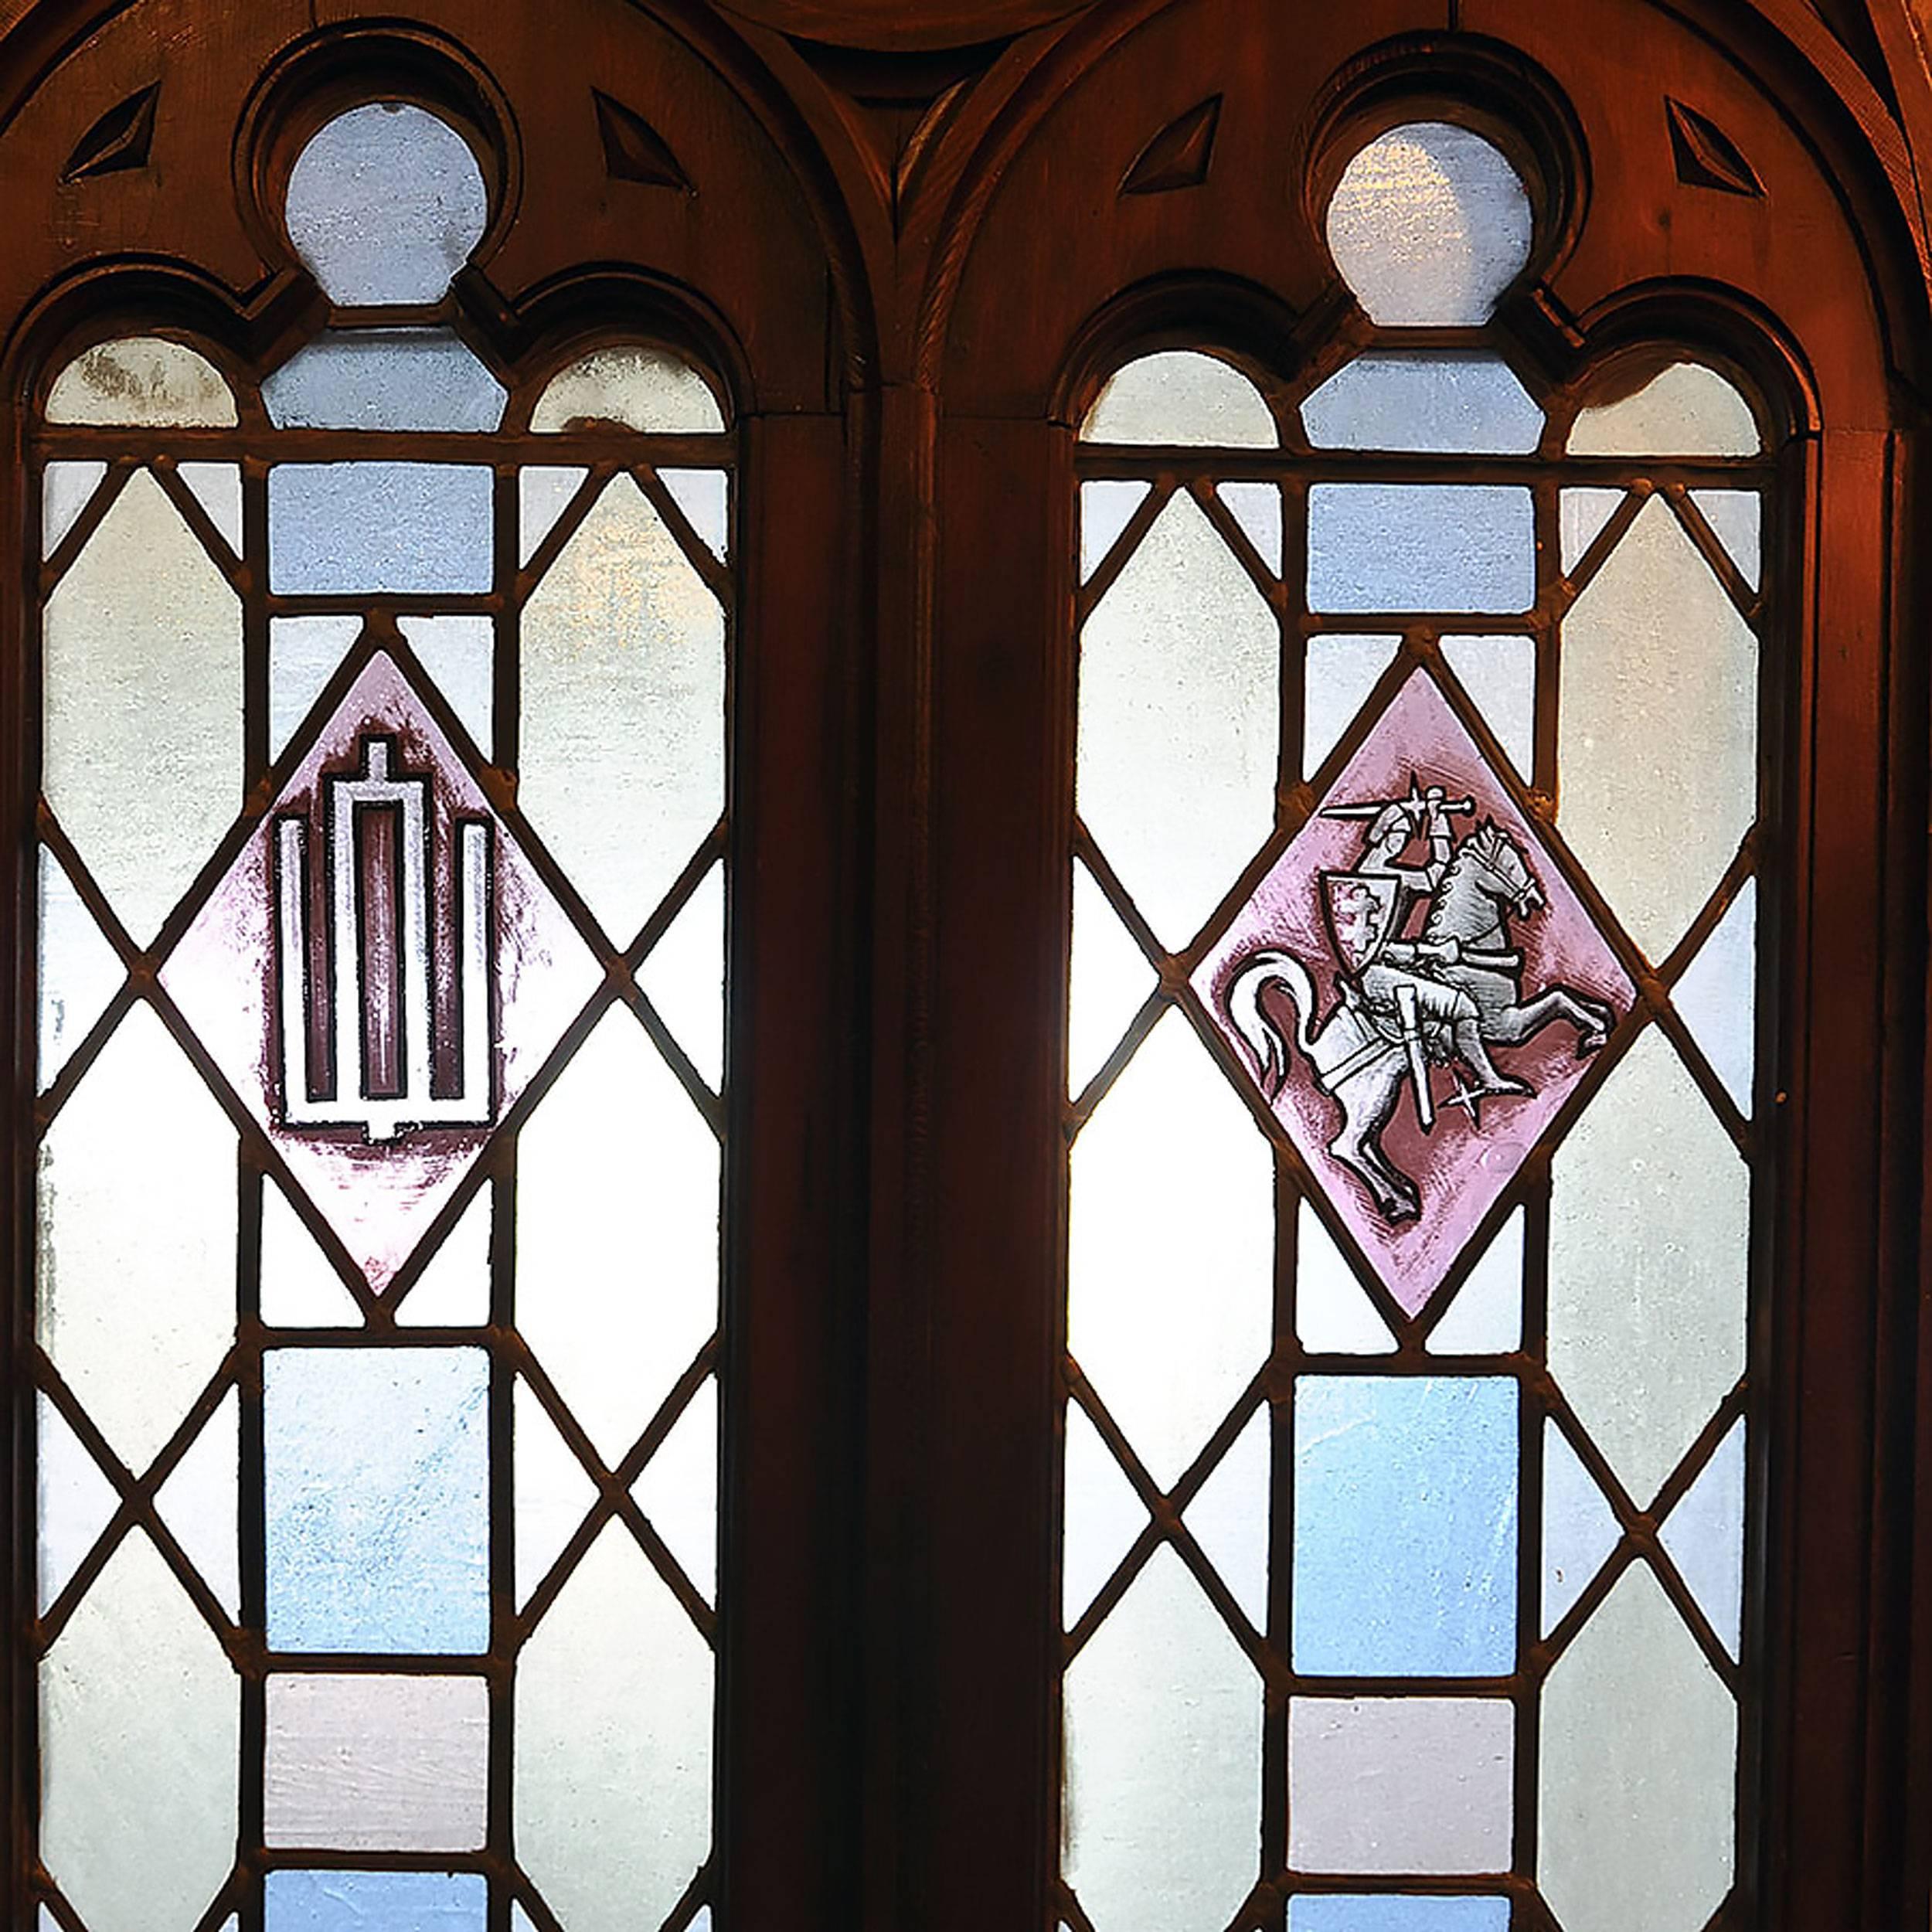 Arched Gothic window with hand-painted emblems and stained glass in a variety of pastel colors. These window is encased completely in a heavy wooden frame. 

Window pictured: 96” tall x 40” wide.